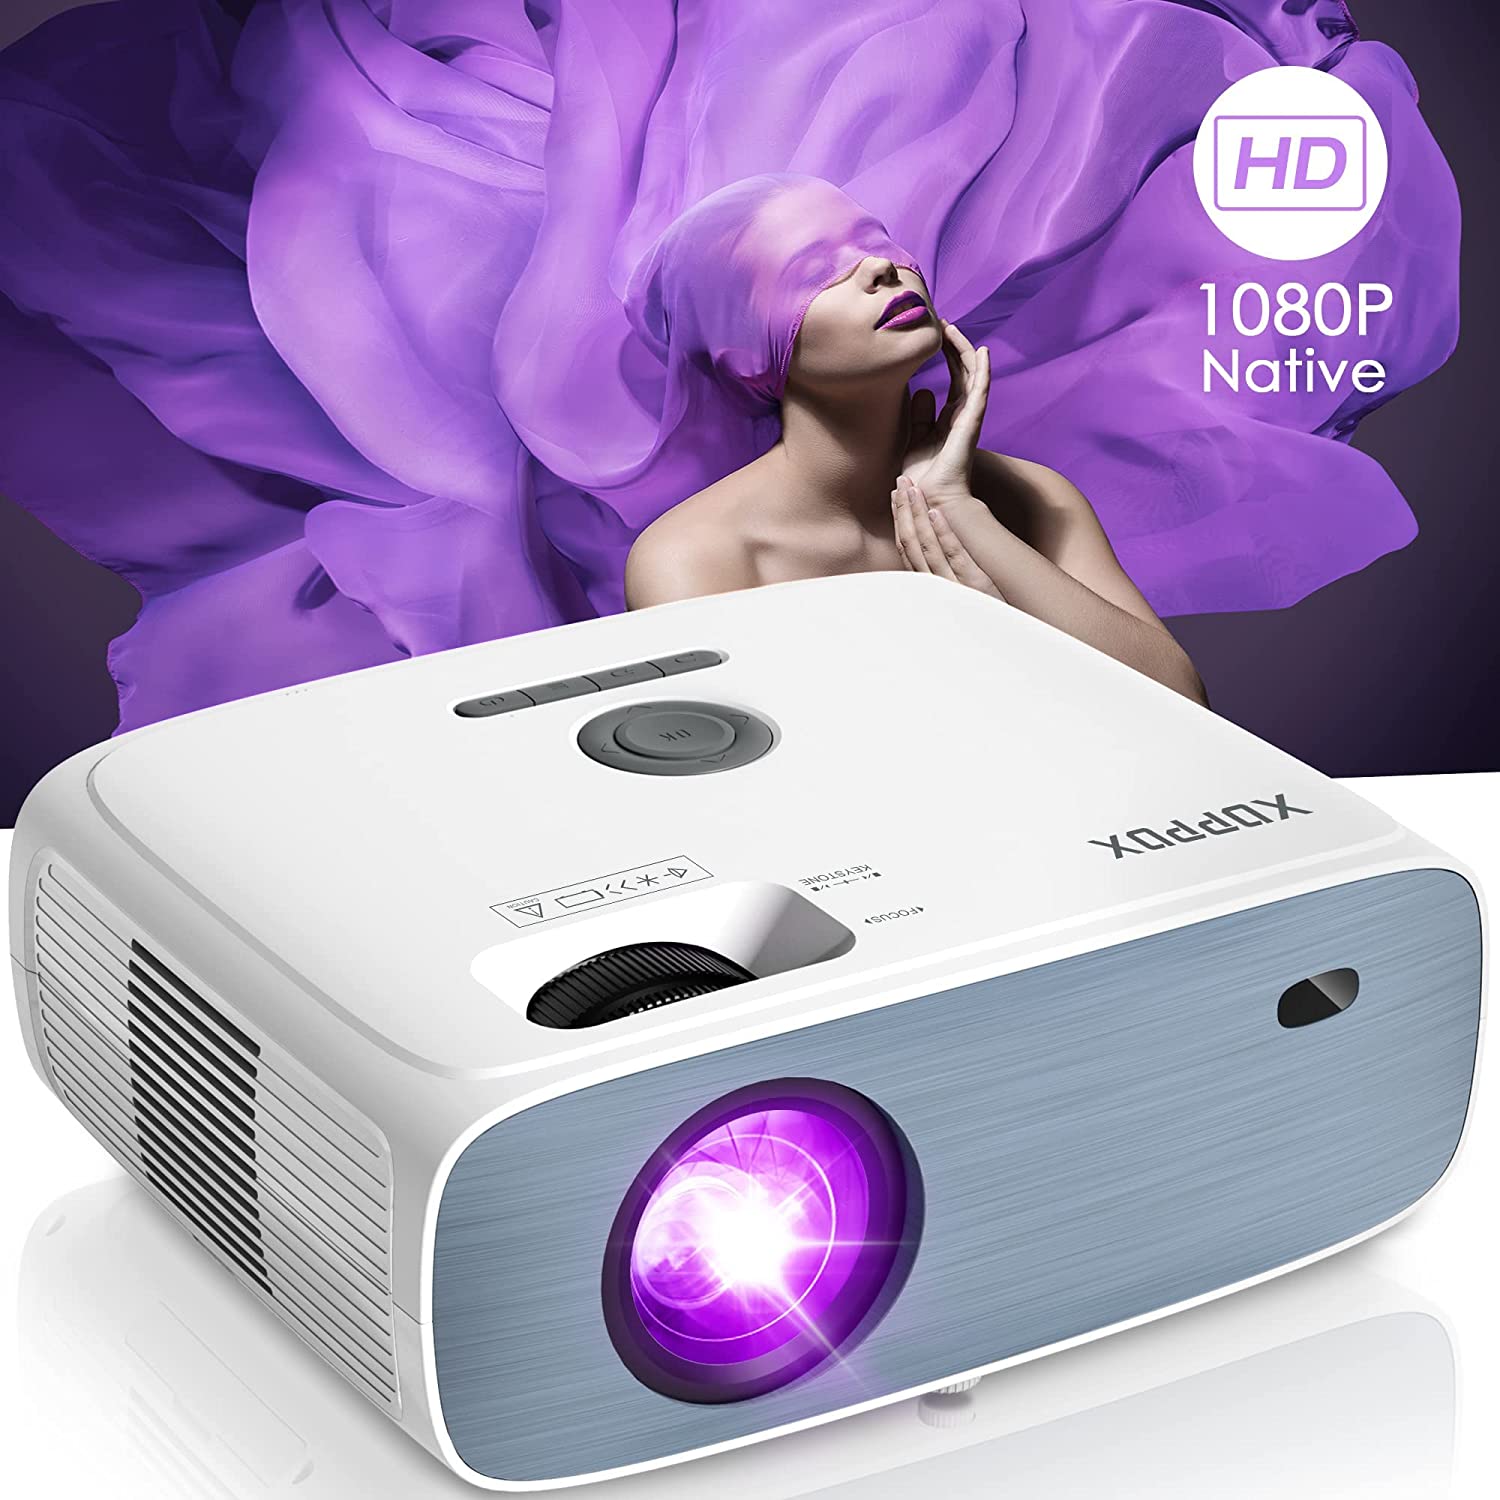 XOPPOX Projector Review, Pros & Cons - 9000L, 1080P Projector